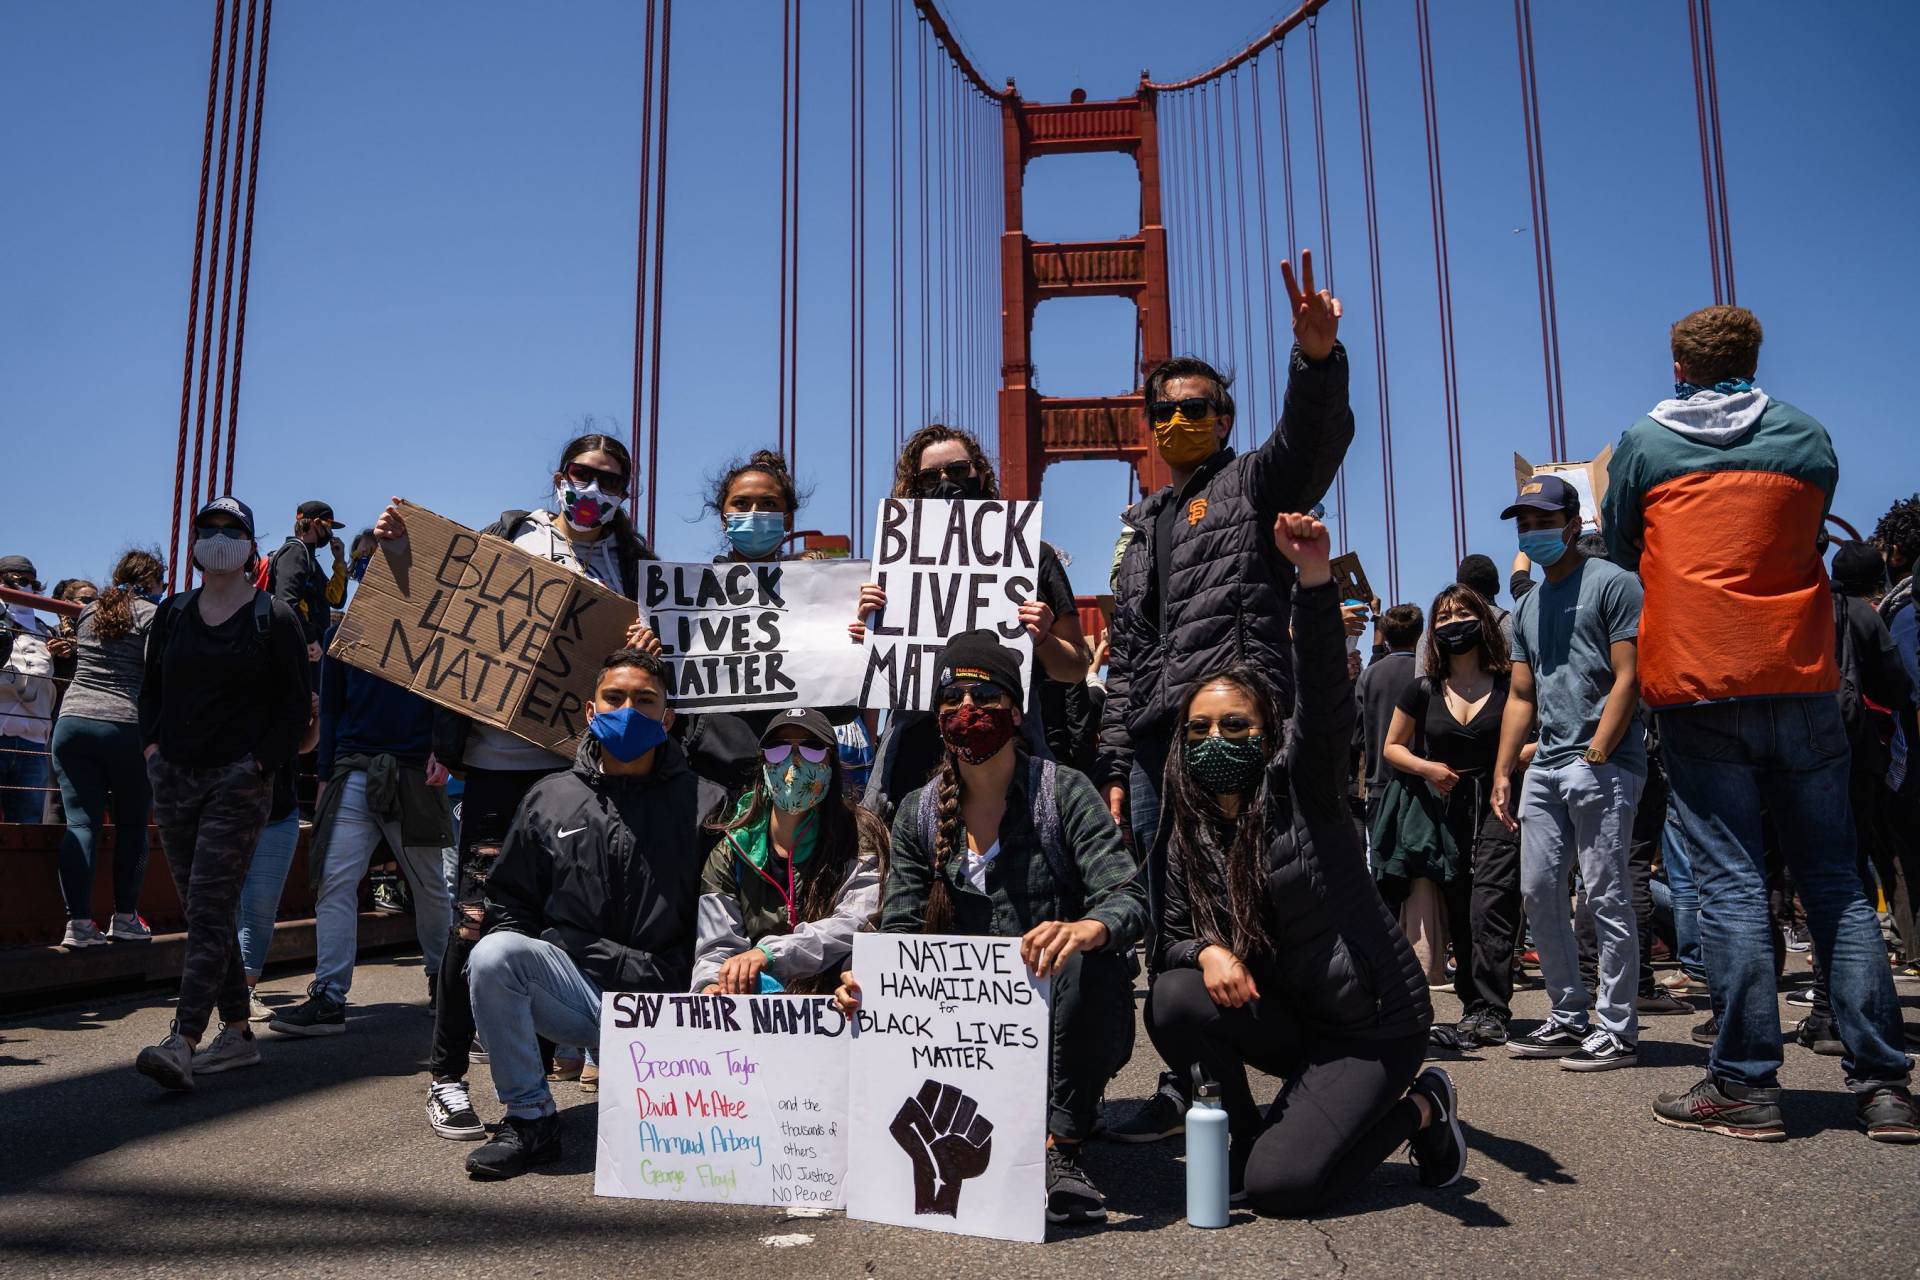 Protesters pose with Black Lives Matter signs on the Golden Gate Bridge during a demonstration against racism and police brutality in San Francisco, California, on June 6, 2020.